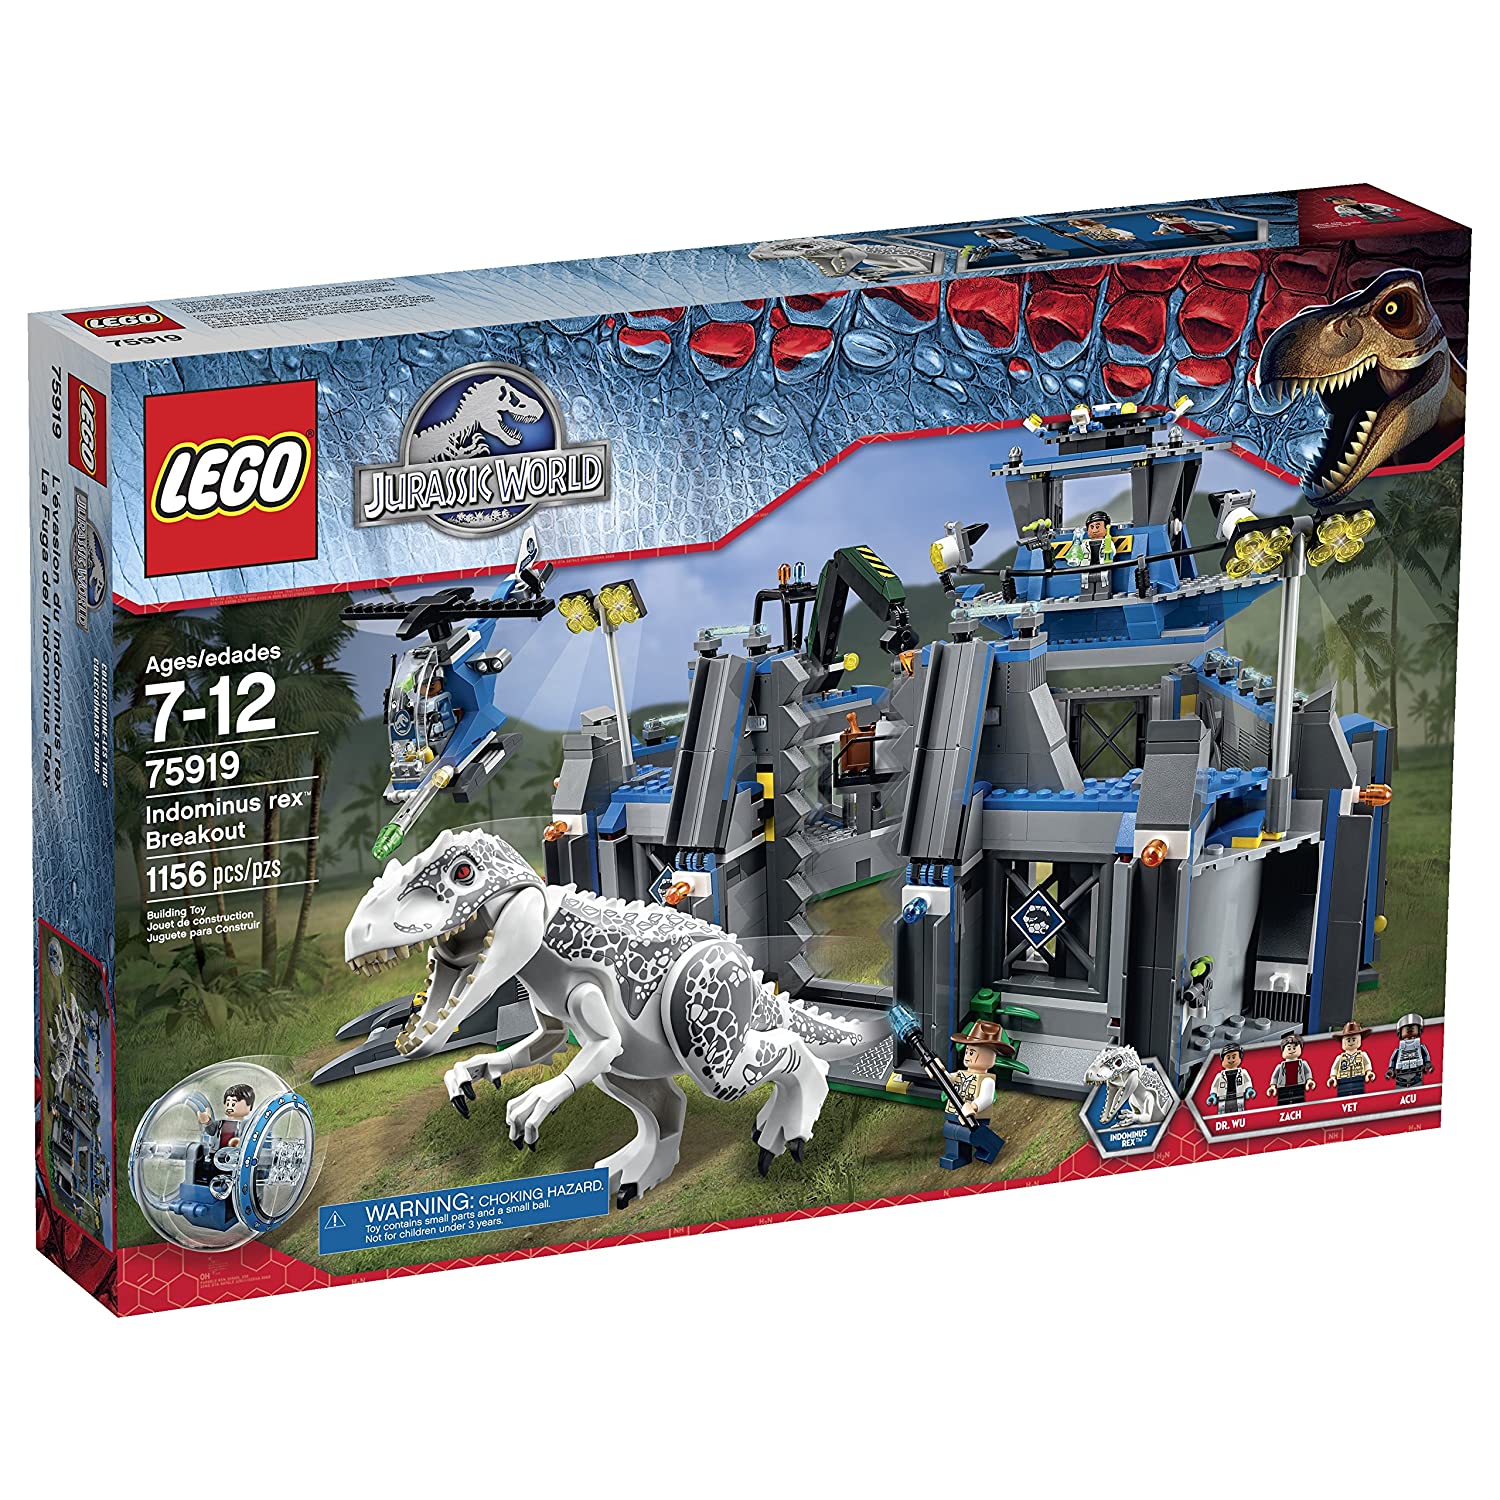 Top 9 Best Lego Jurassic Park Sets Reviews in 2023 3